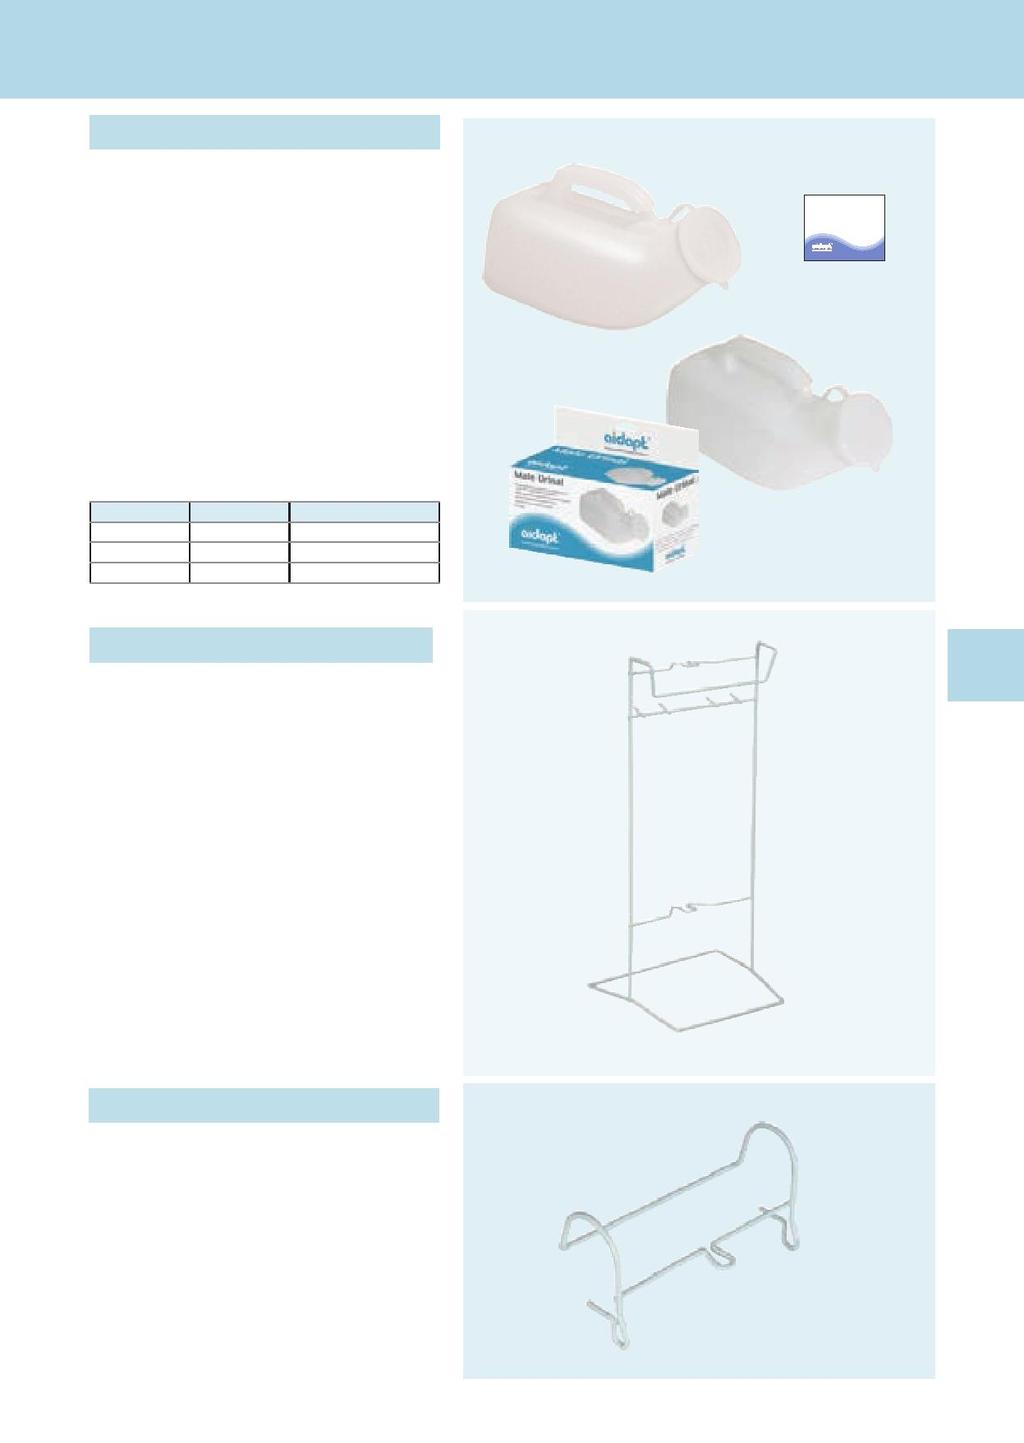 Incontinence Male Urinal Portable Male Urinal is handy for use in the bedroom for people who struggle to get to the bathroom 1000ml capacity and integral handle for ease of emptying.